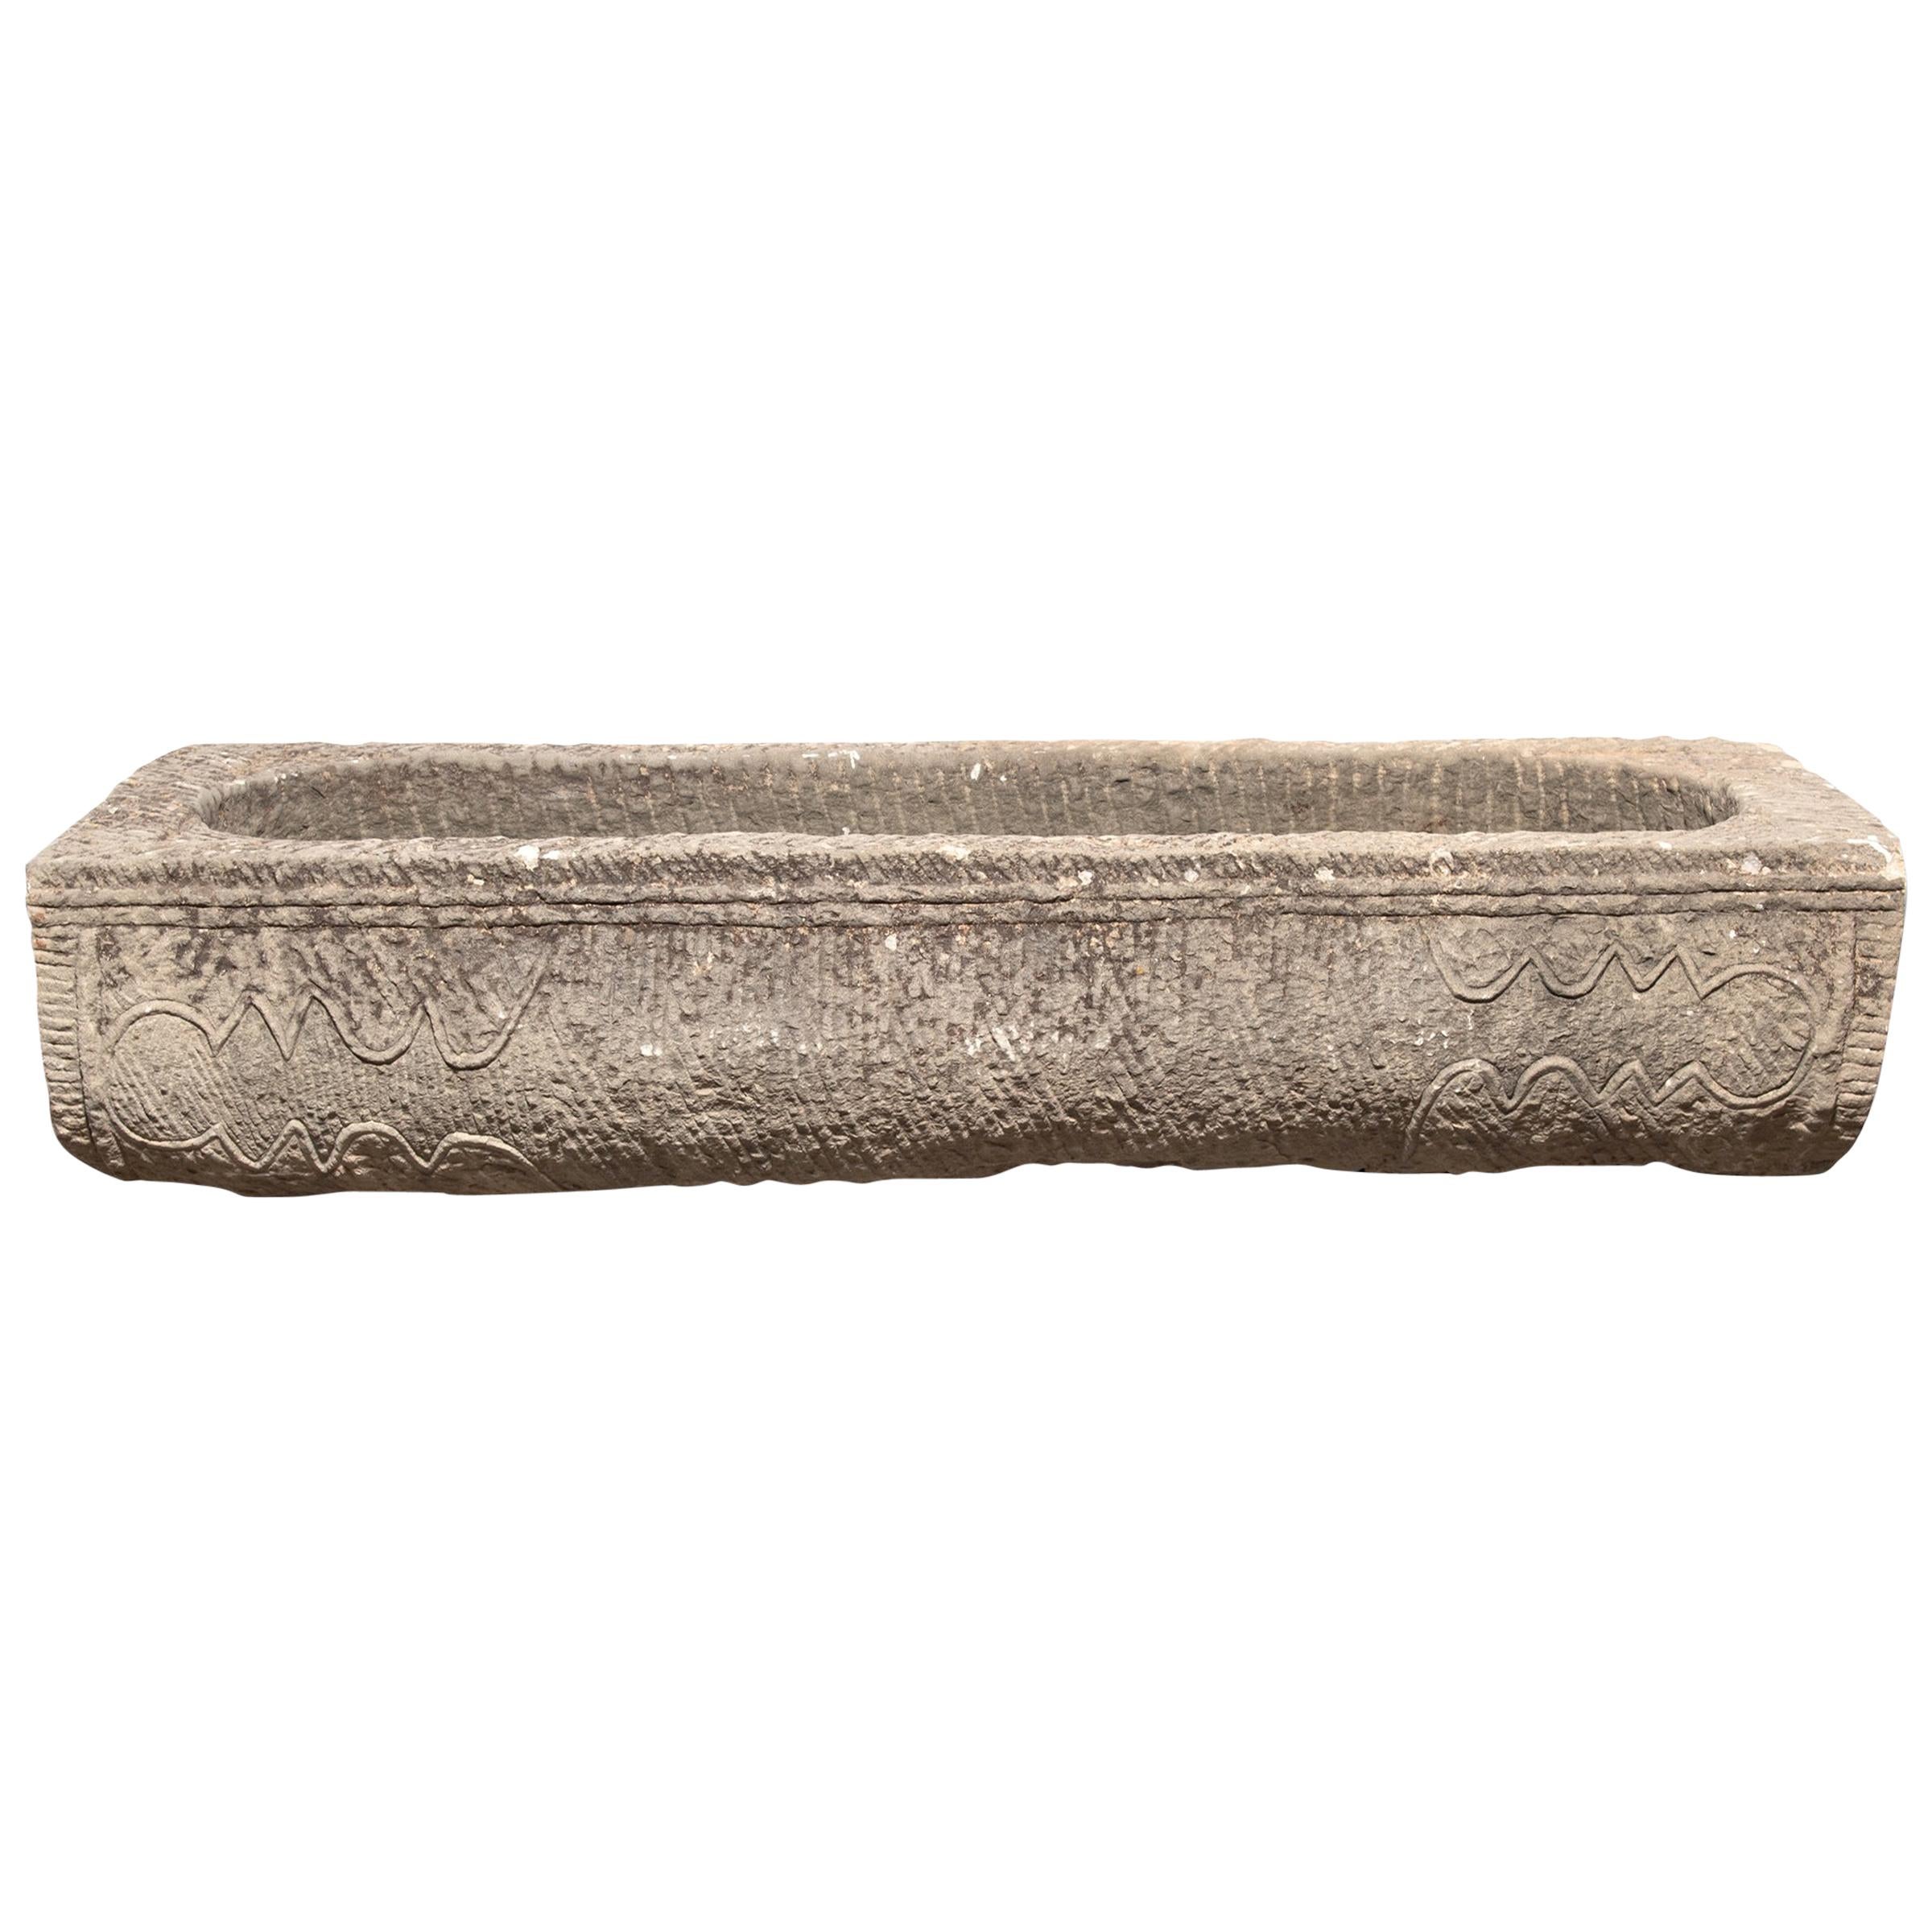 Chinese Etched Limestone Trough, c. 1800